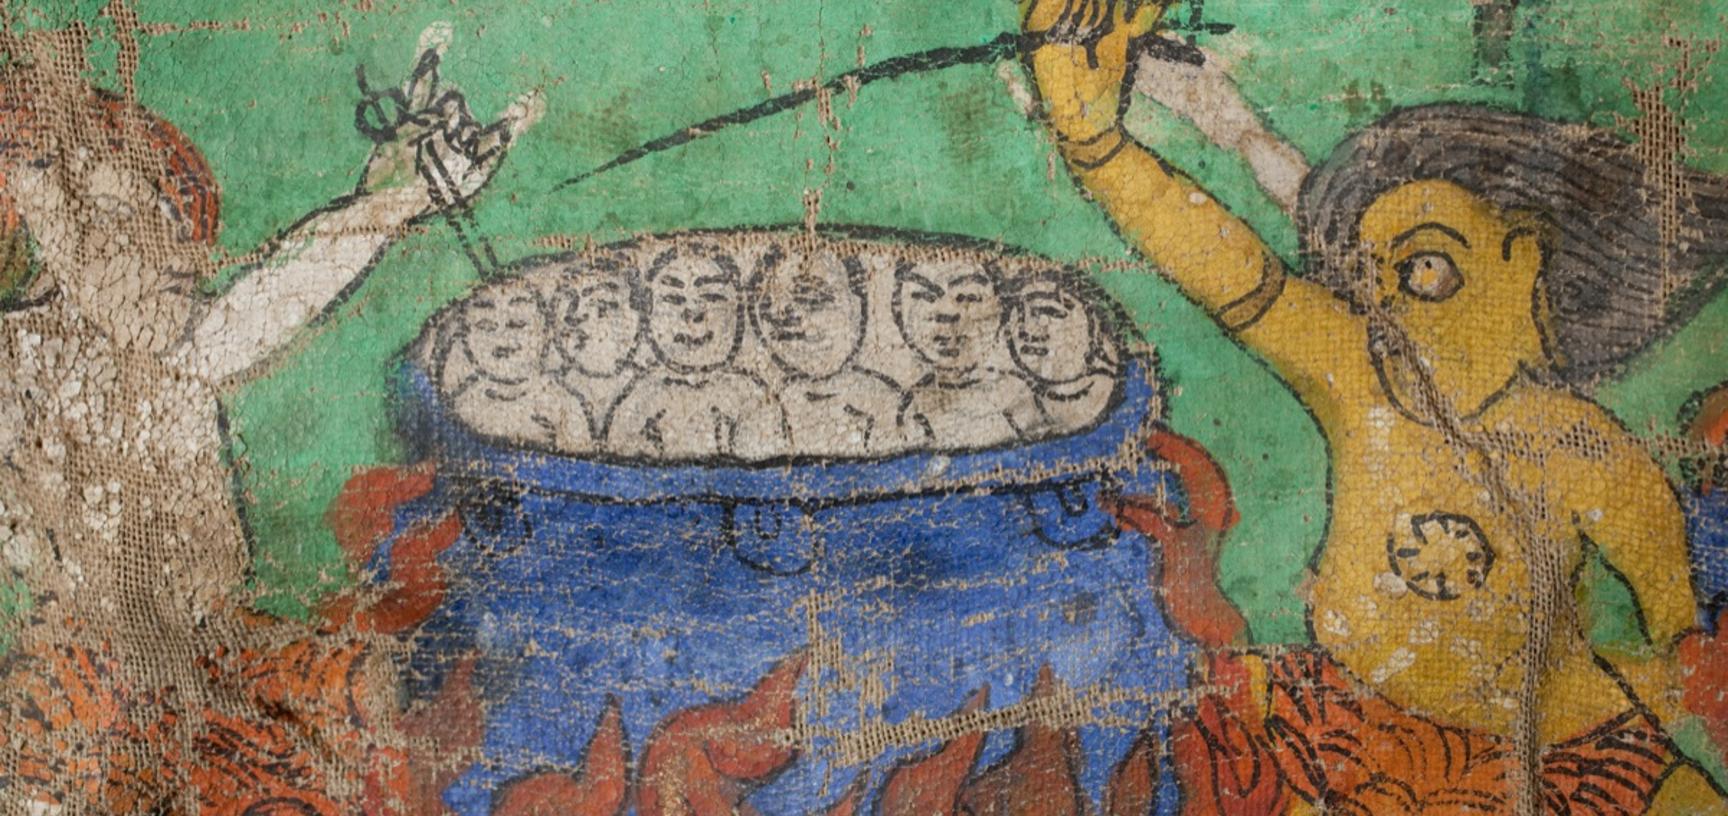 Detail of victims being boiled alive from a thanka painting describing the torments of hell. Photograph by Patrick Sutherland. Pin, Spiti, Himachal Pradesh, India. 2010.